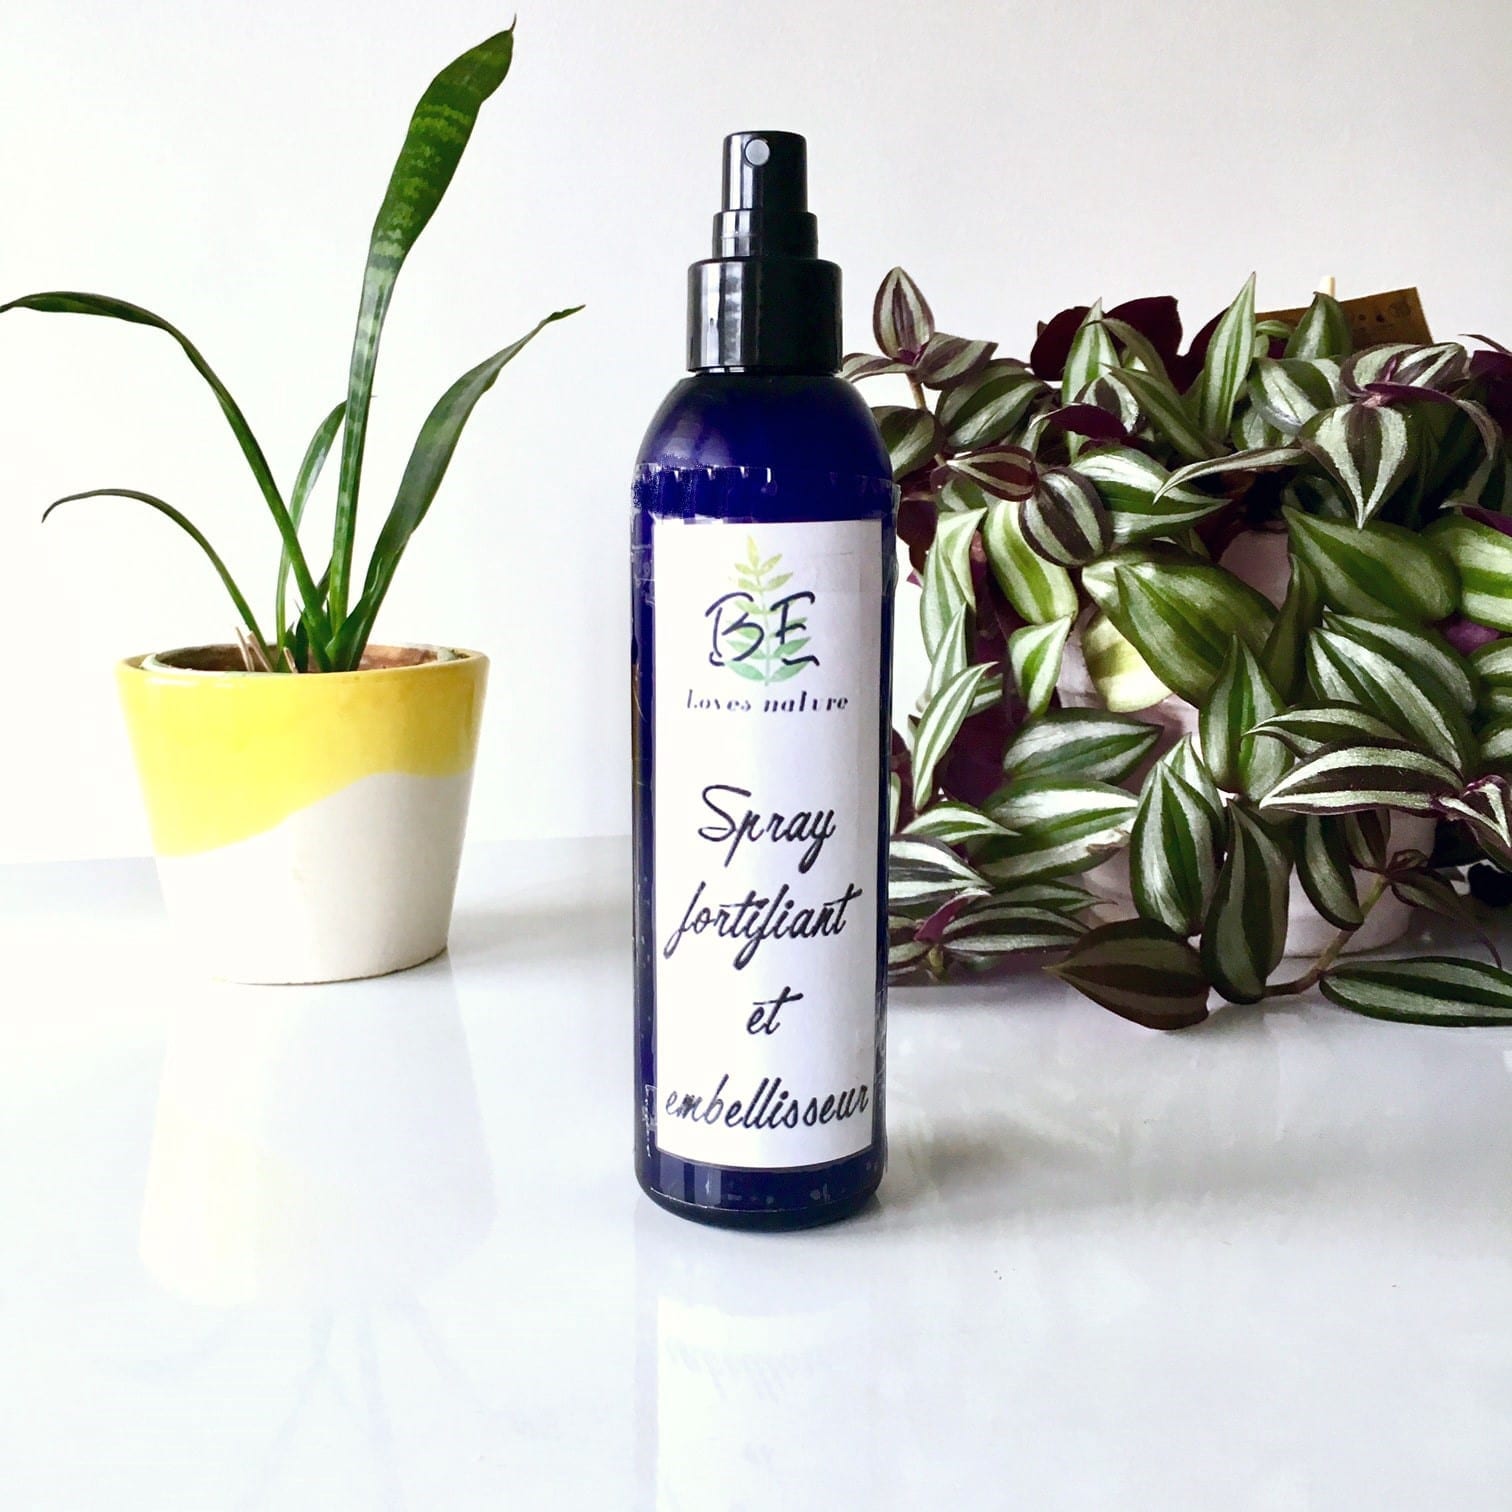 Spray cheveux: fortifiant & embellisseur